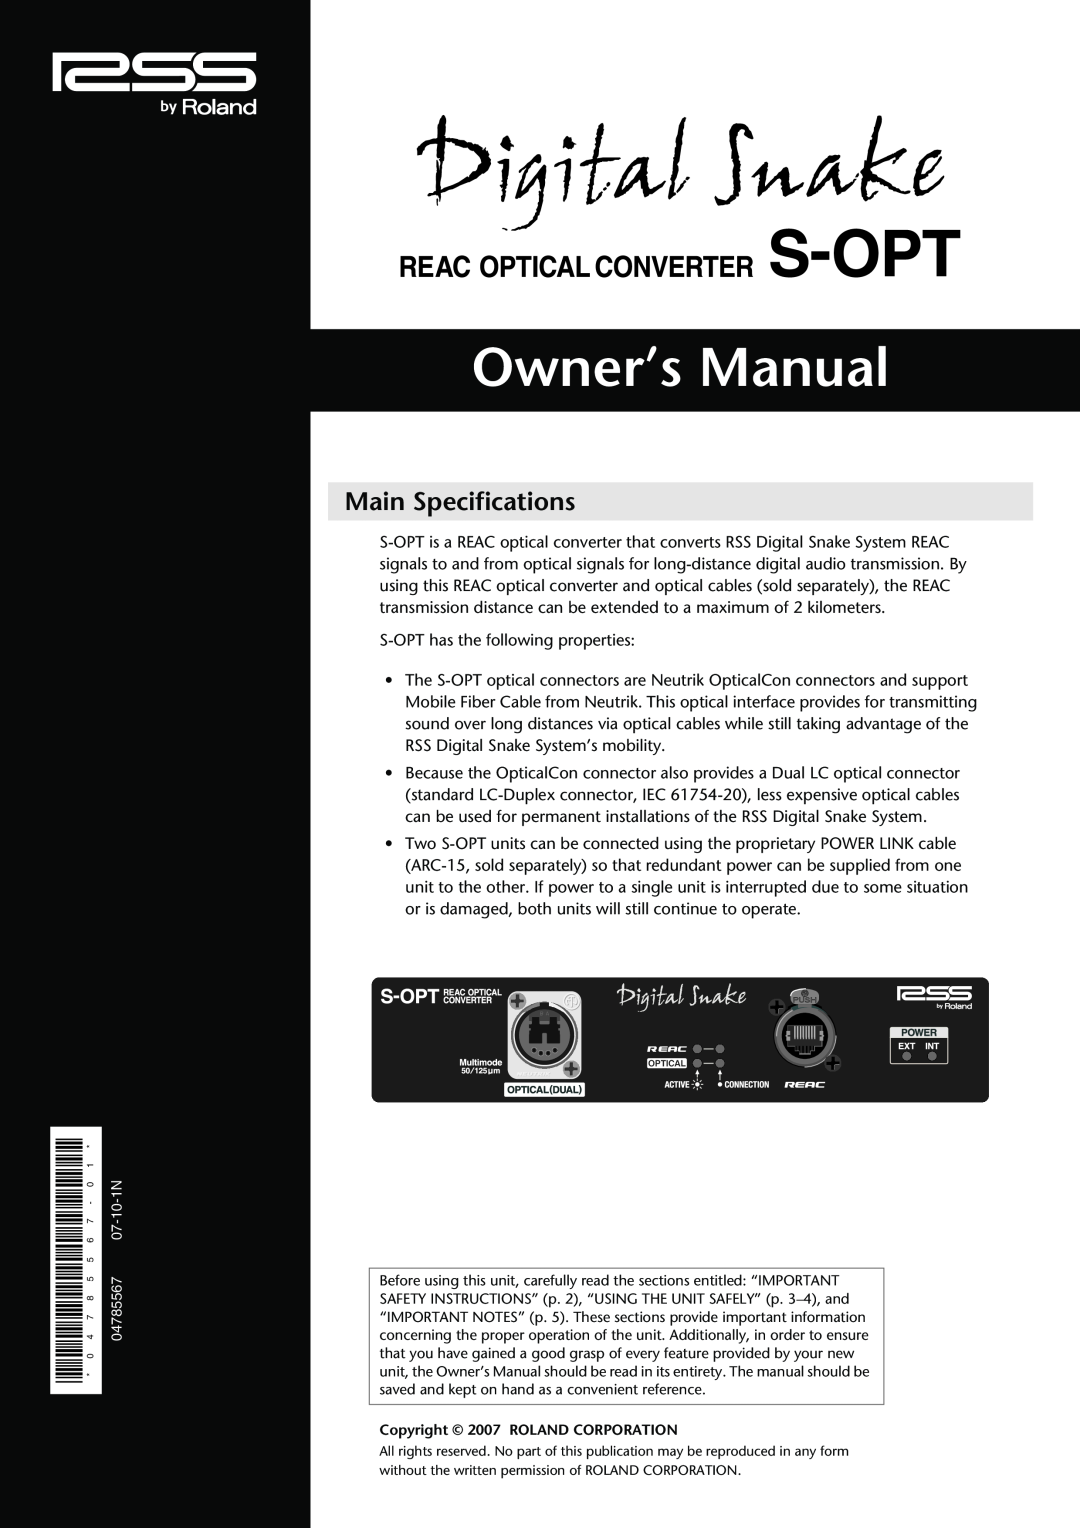 Roland S-OPT specifications S-Opt, TOLL FREE 800.380.2580 FAX, REAC Optical Converter, Features, Specifications 